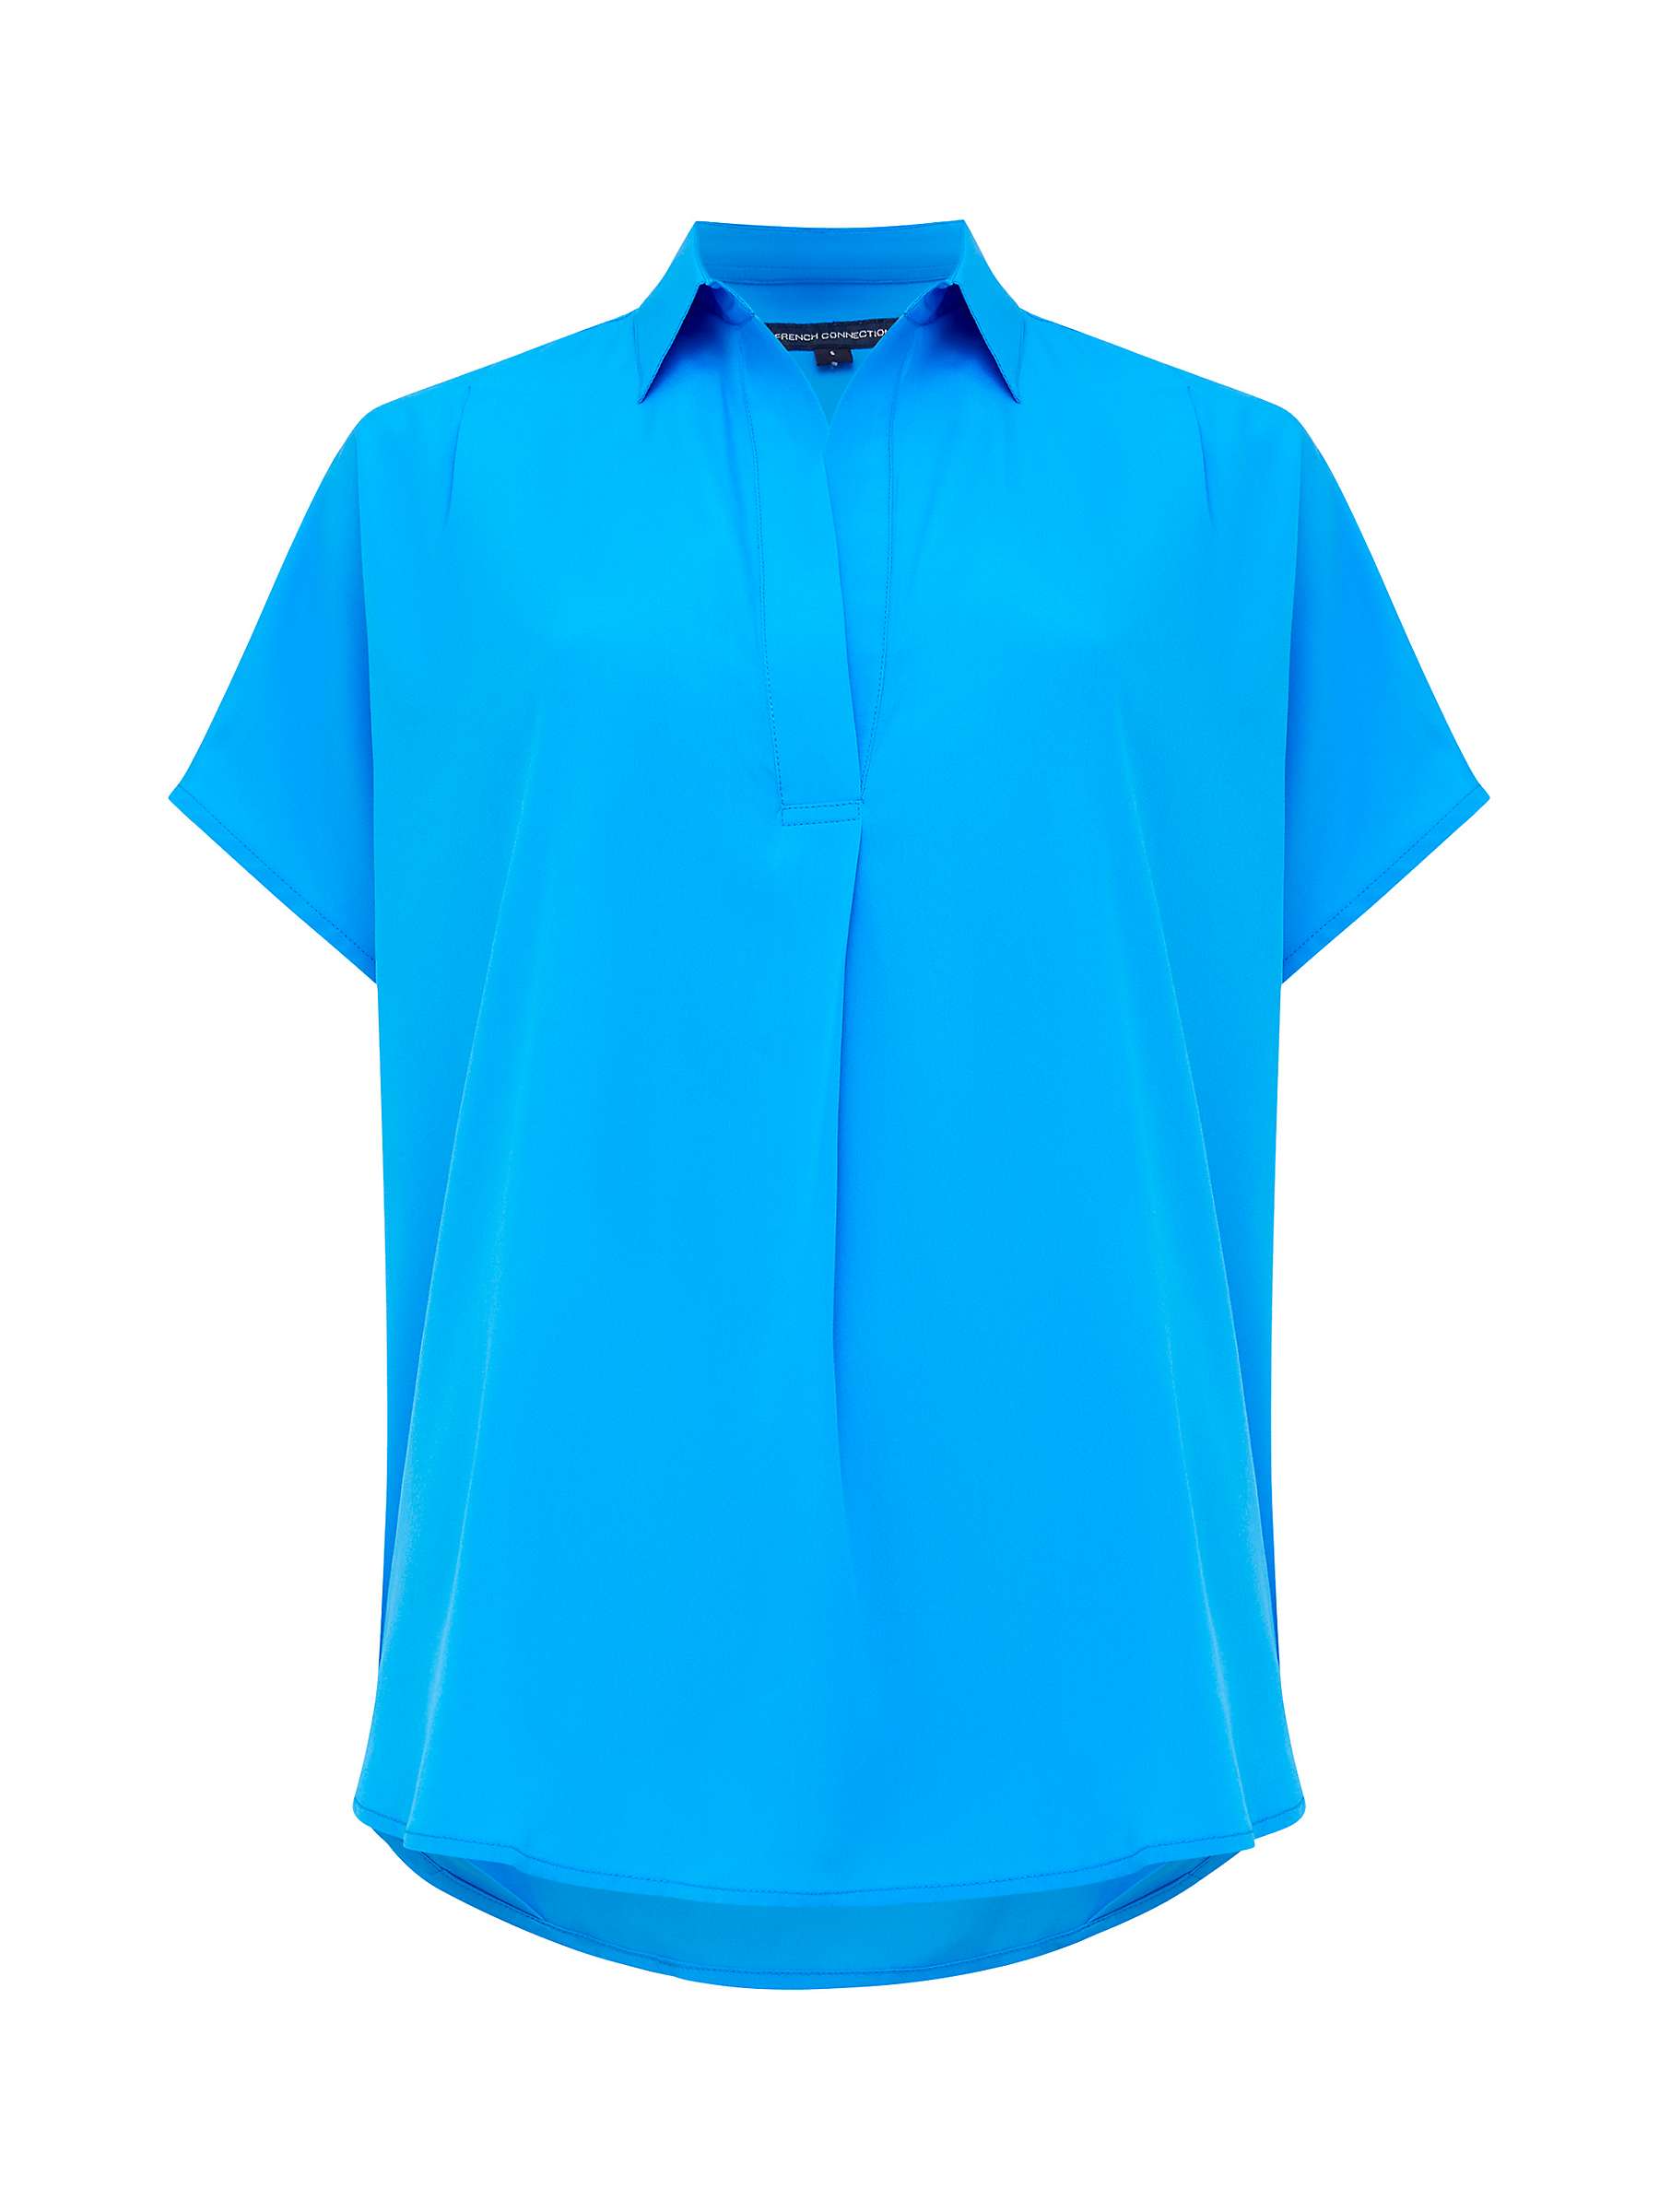 Buy French Connection Crepe Sleeveless Blouse, Blue Sea Star Online at johnlewis.com